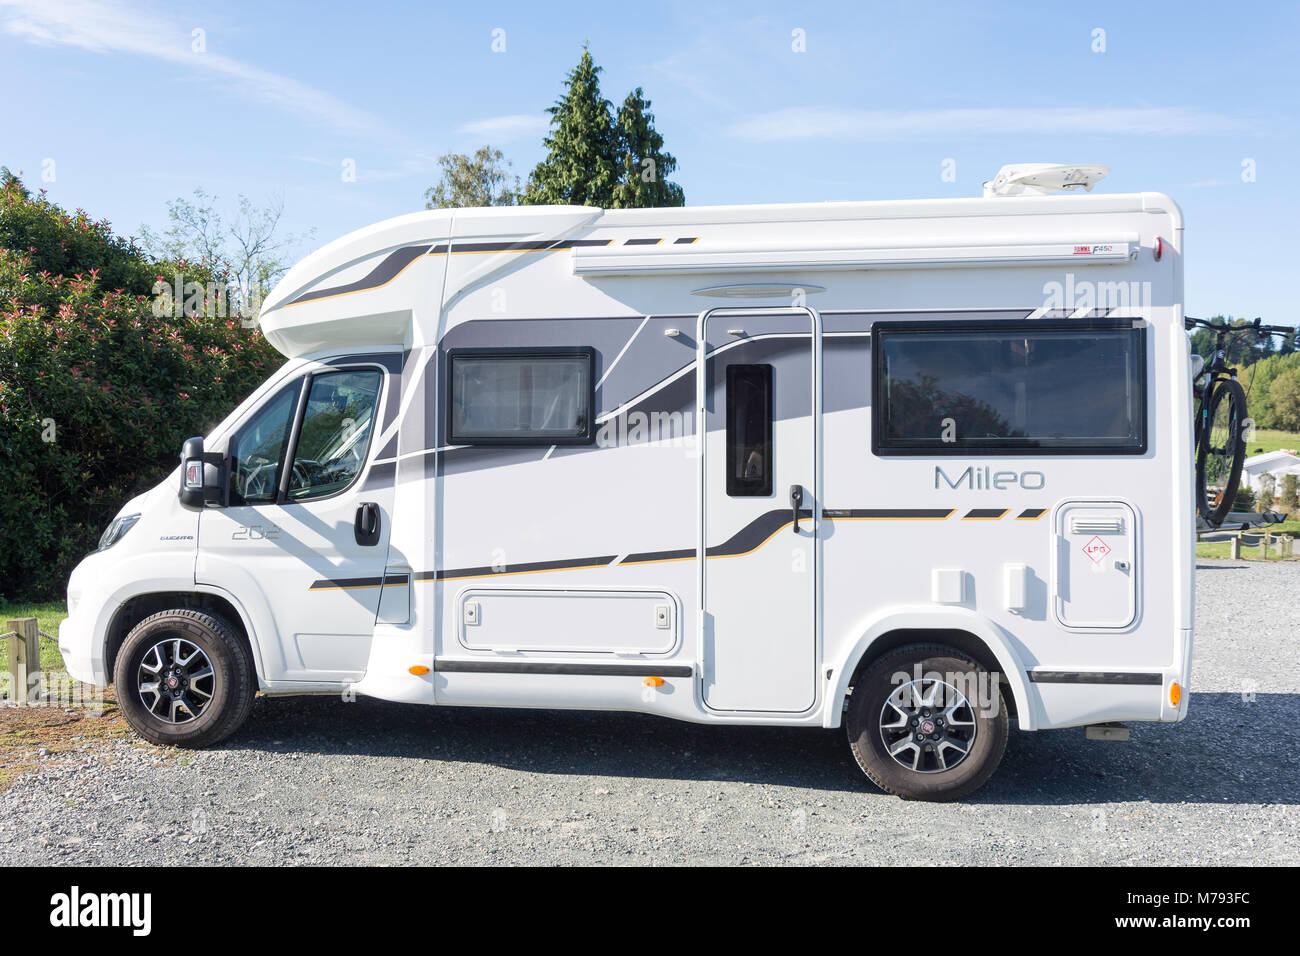 Benimar Mileo 202 motorhome recreational vehicle RV at Moutere Inn, Moutere Highway, Upper Moutere, Tasman District, New Zealand Stock Photo